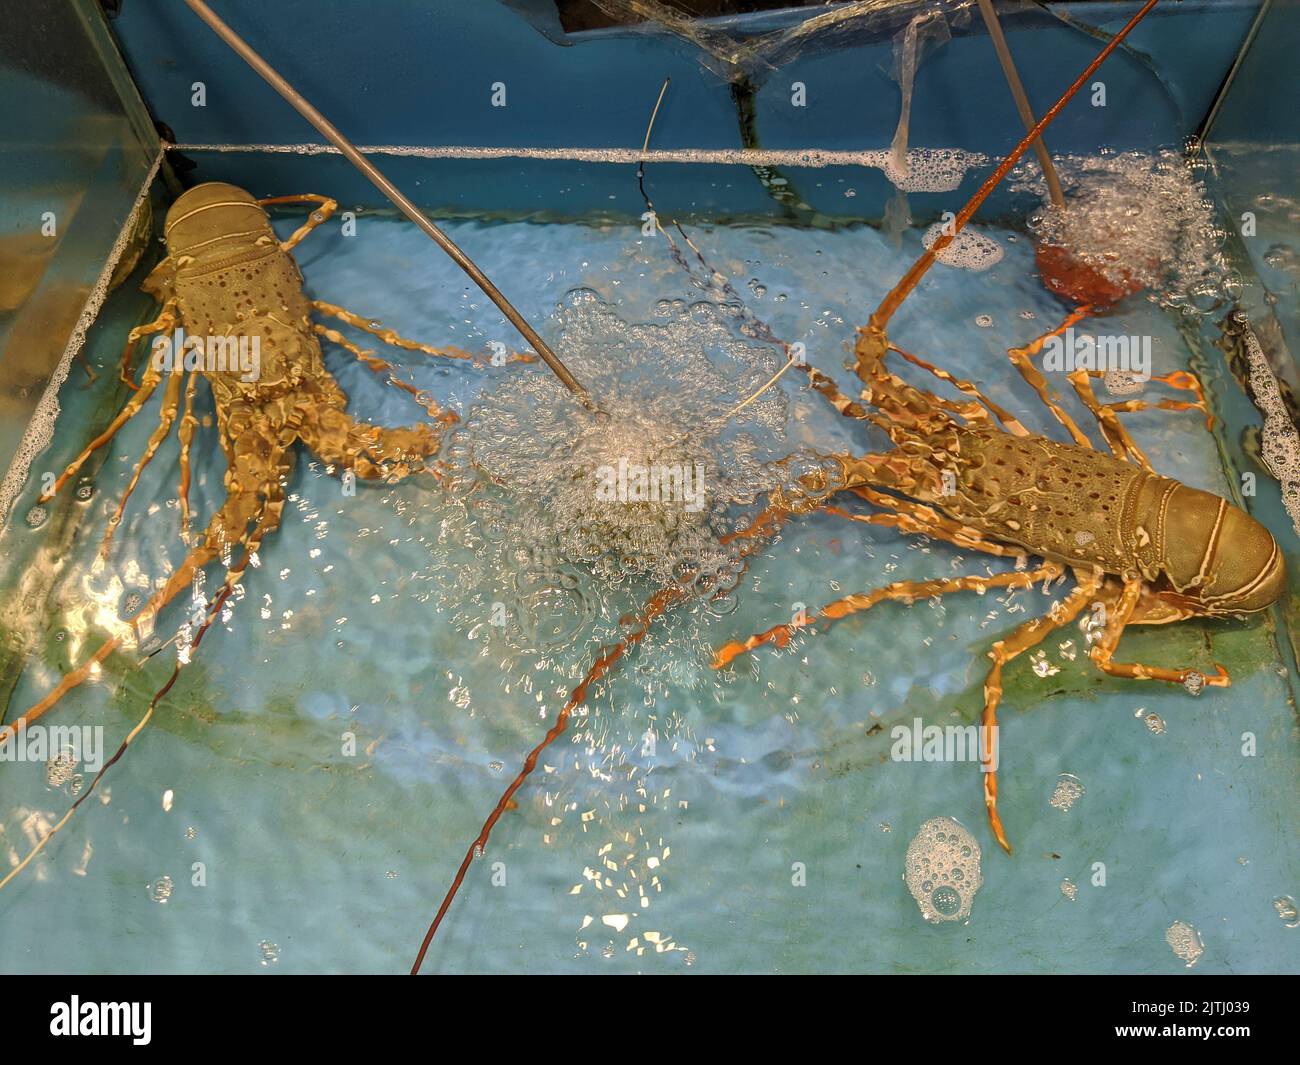 Lobsters in a tank of water at a seafood restaurant, Phuket, Thailand Stock Photo